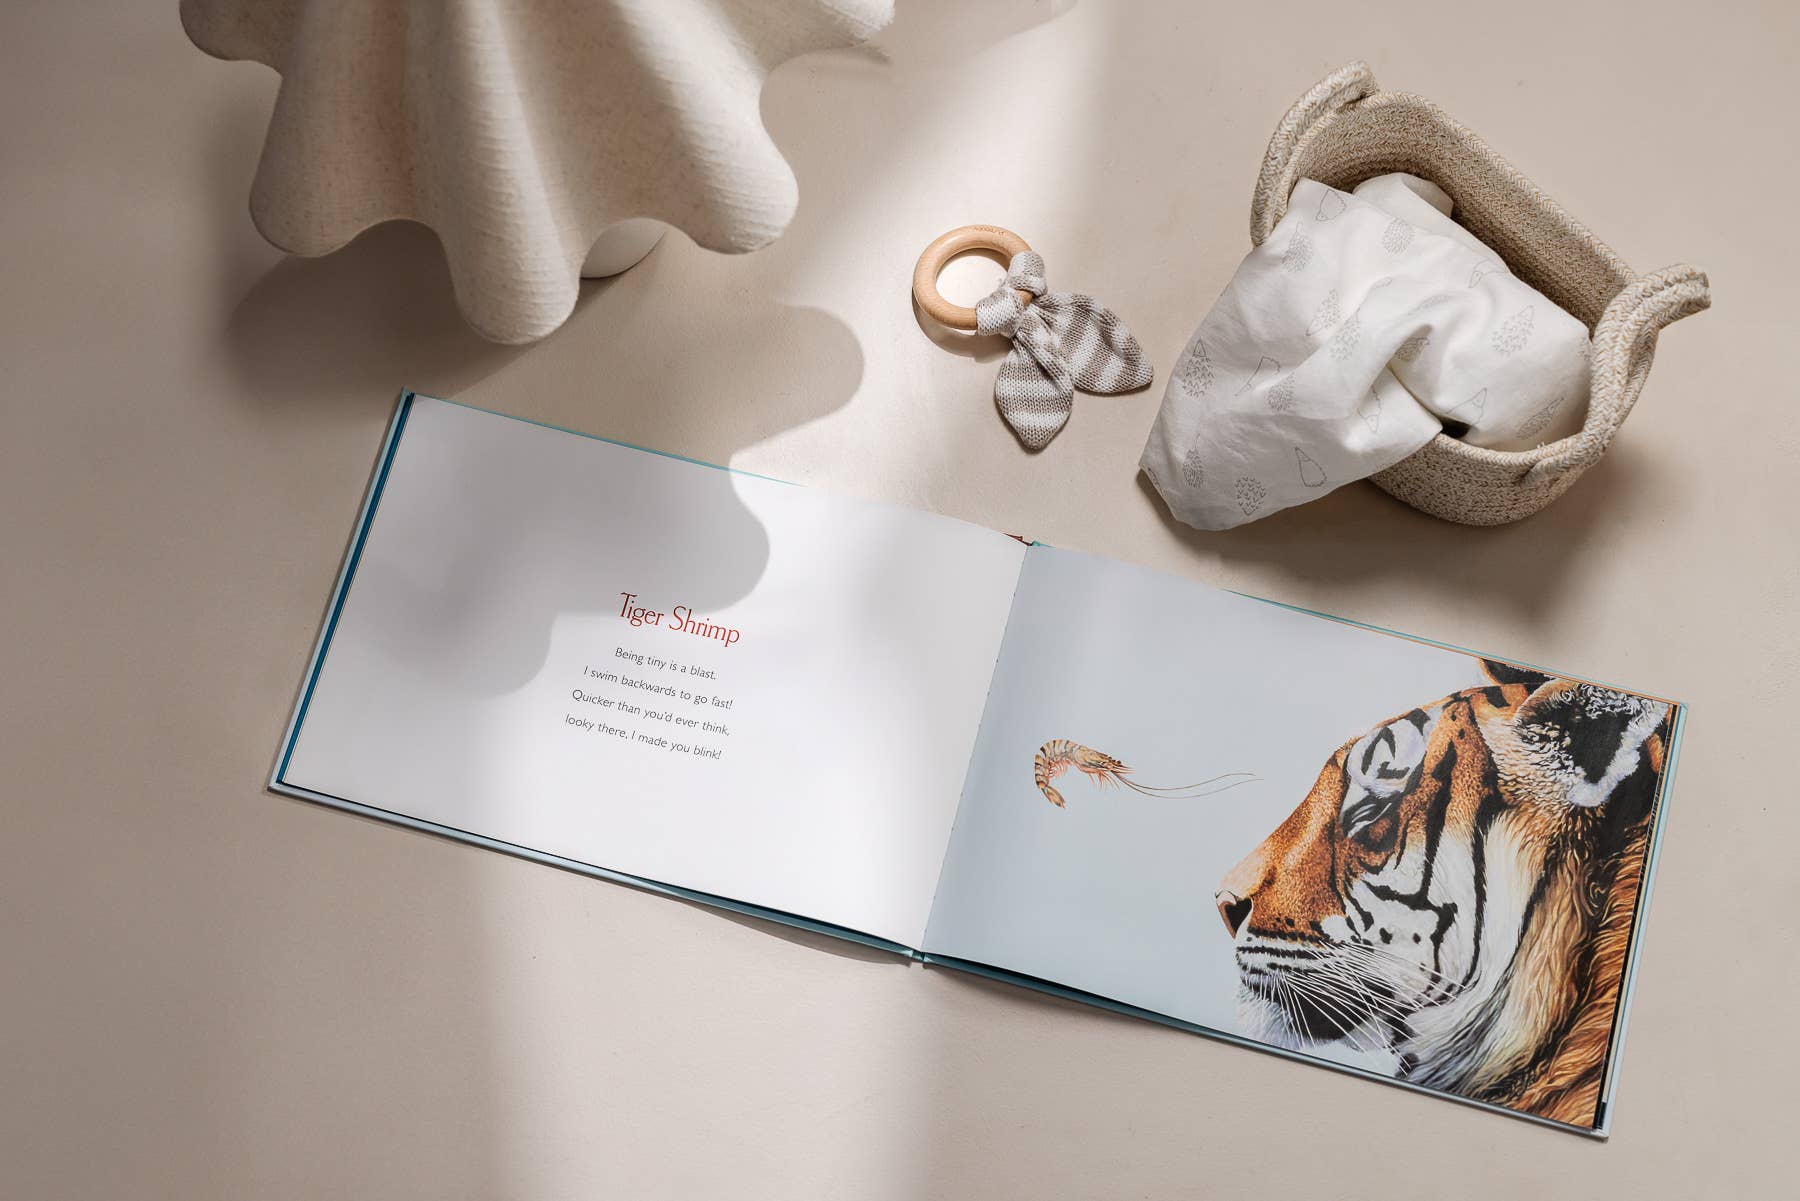 An open You Stole My Name (Picture Book for Kids) with an illustration of a tiger, showcasing the majestic beauty of the animal kingdom.